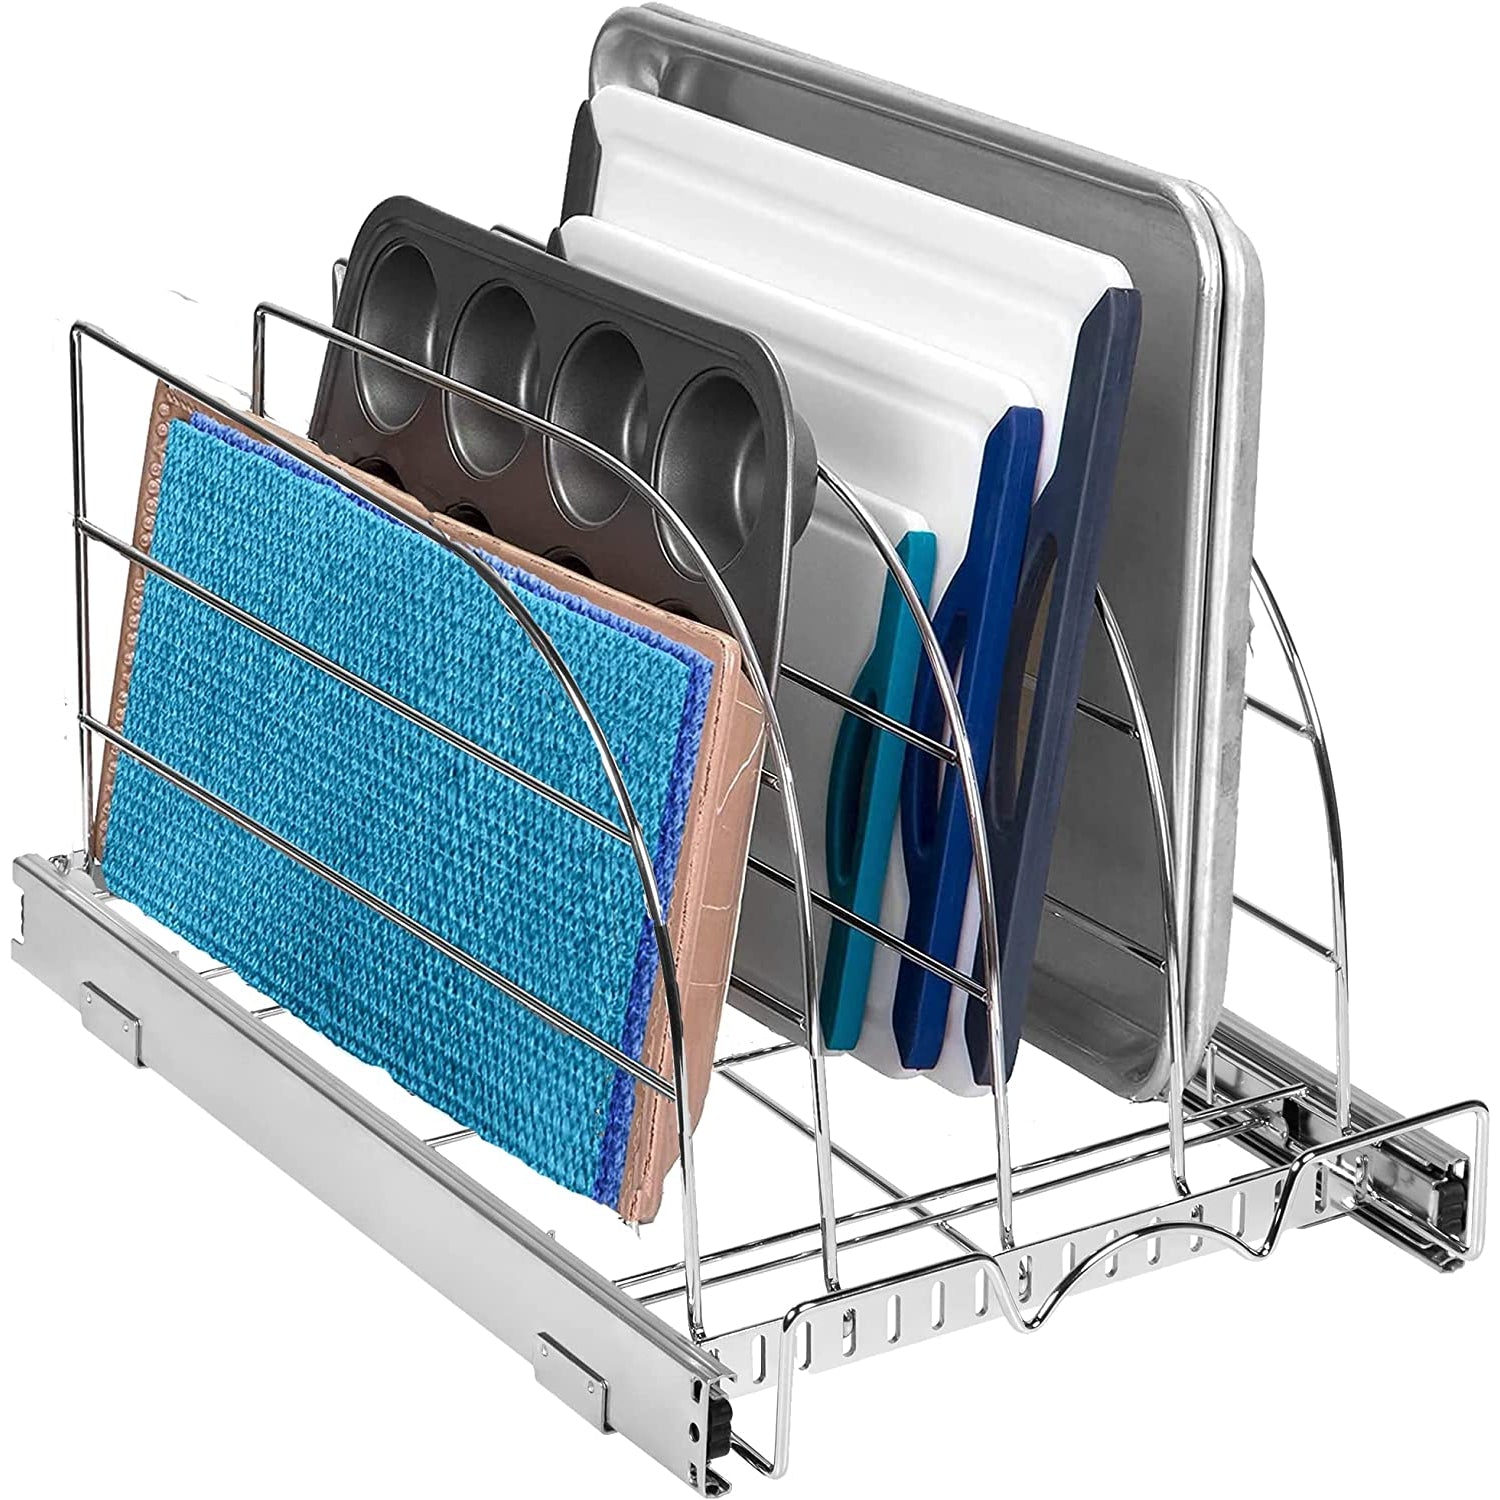 Pull Out Organizer for Cookie Sheet, Cutting Board, Bakeware, and Tray, Sliding Rack- Heavy Duty-5 Year Limited Warranty - for Under Sink / Under Cabinet, , Chrome